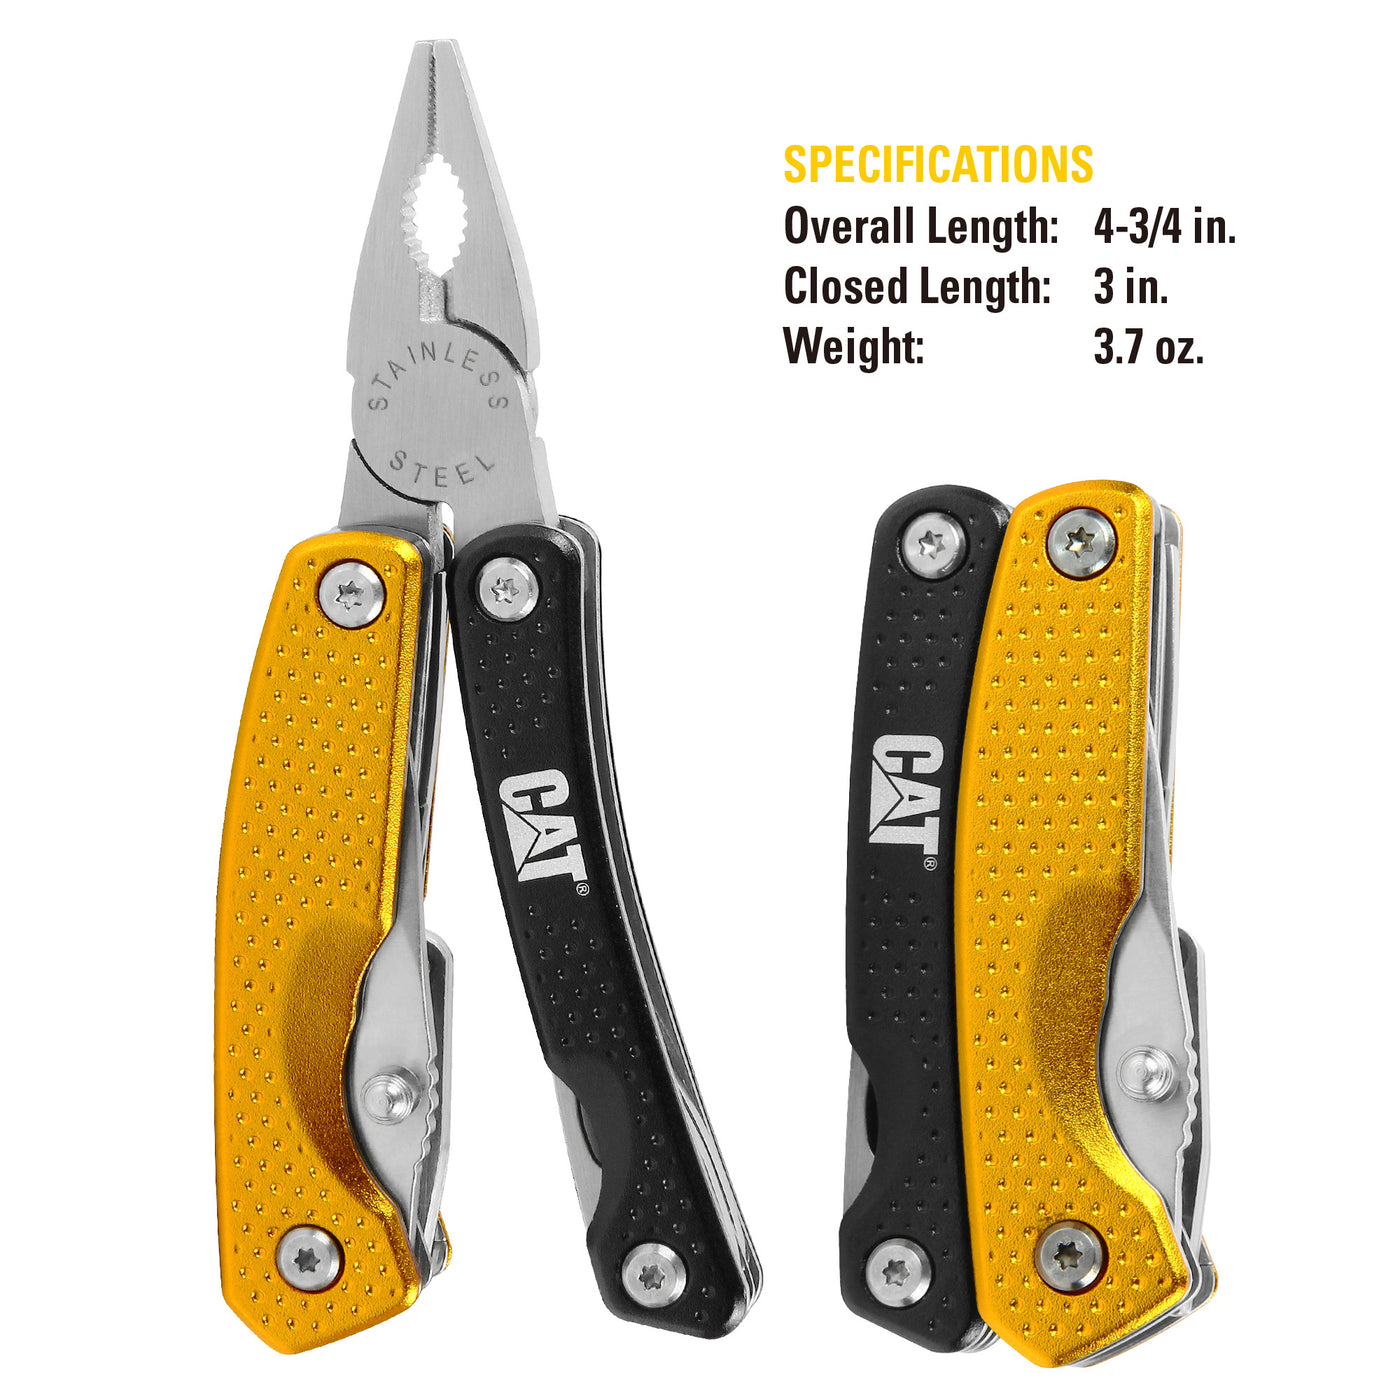 8-in-1 Multi-Pliers, Black and Yellow Handle, Multi-Function Tool